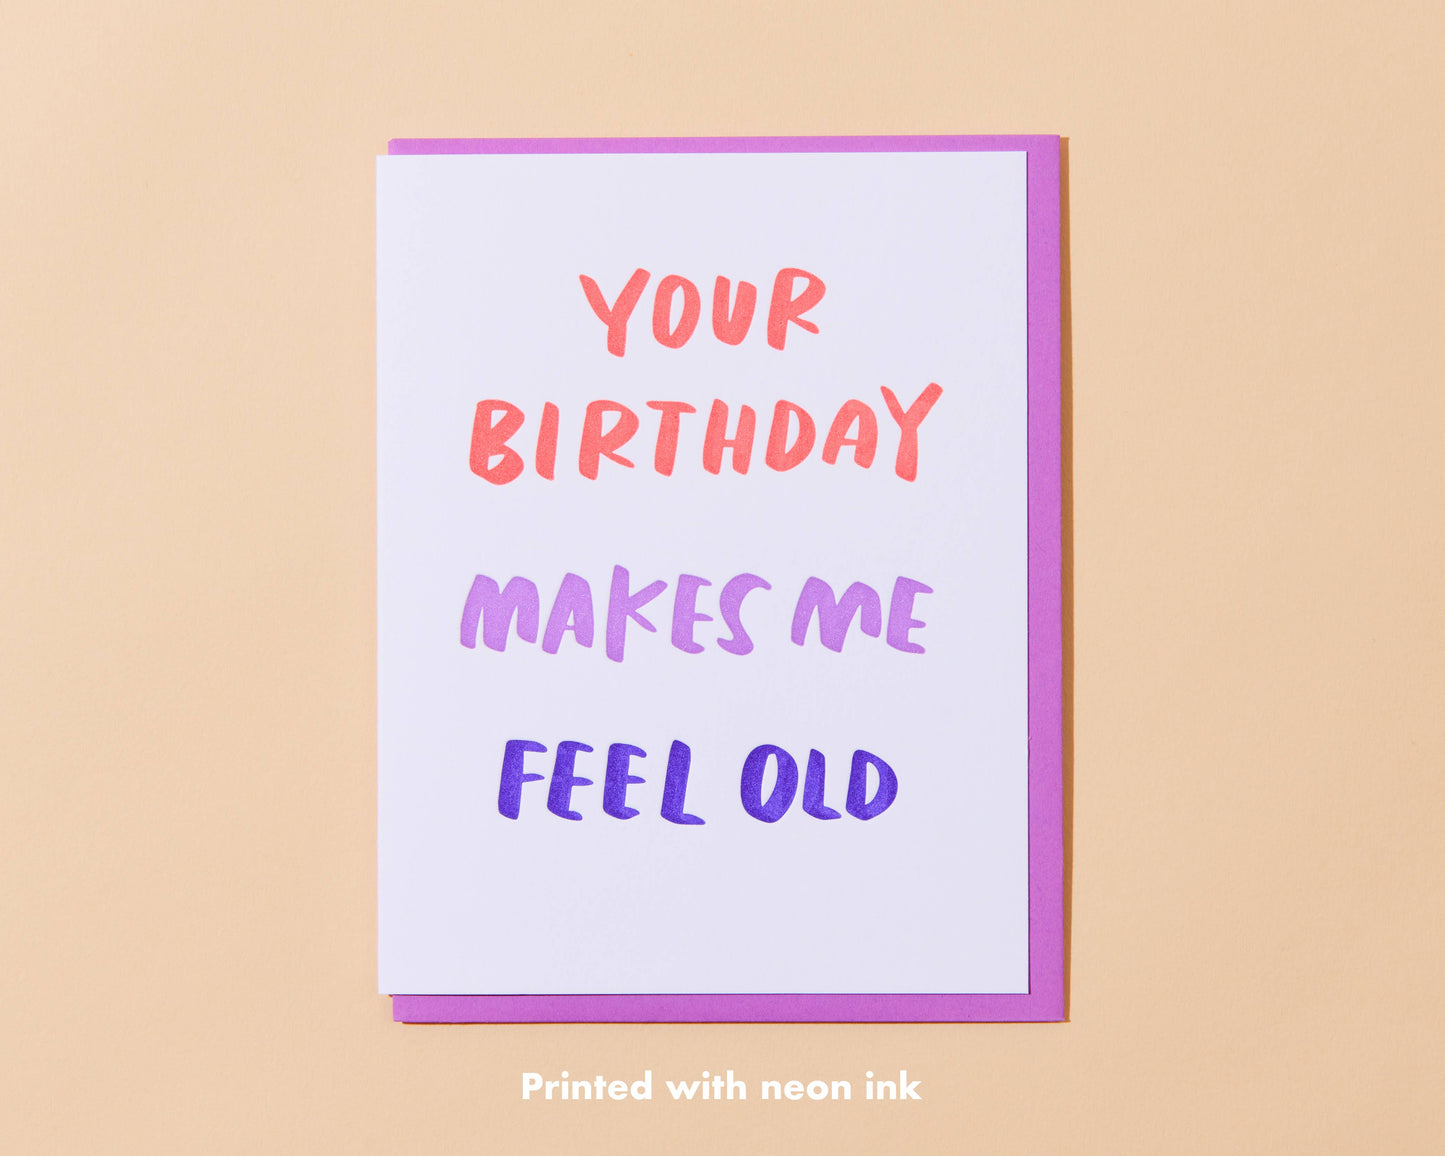 Your Birthday Makes Me Feel Old Letterpress Greeting Card